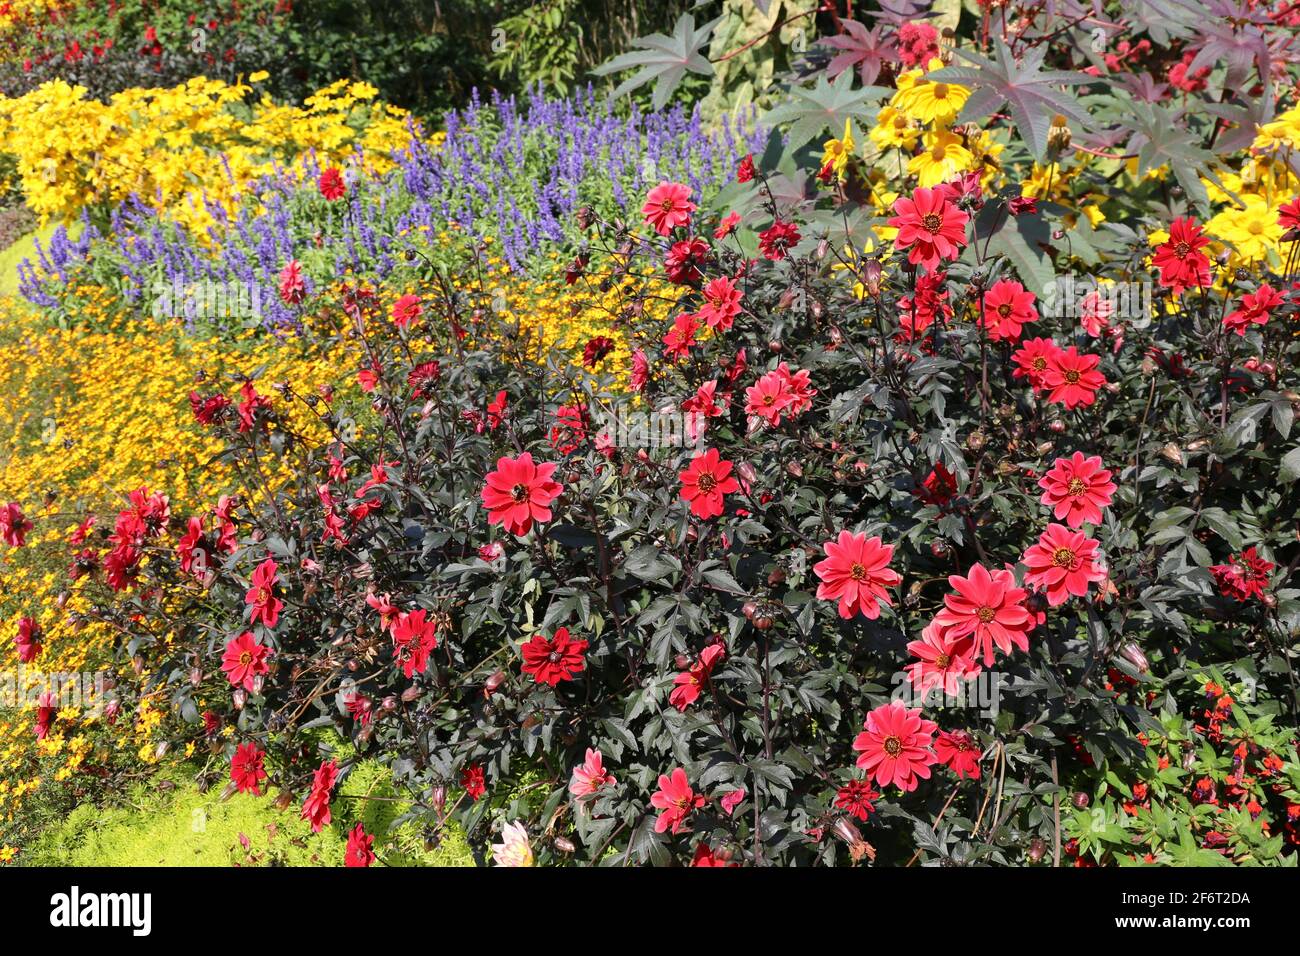 Neat and tidy flower garden. Stock Photo